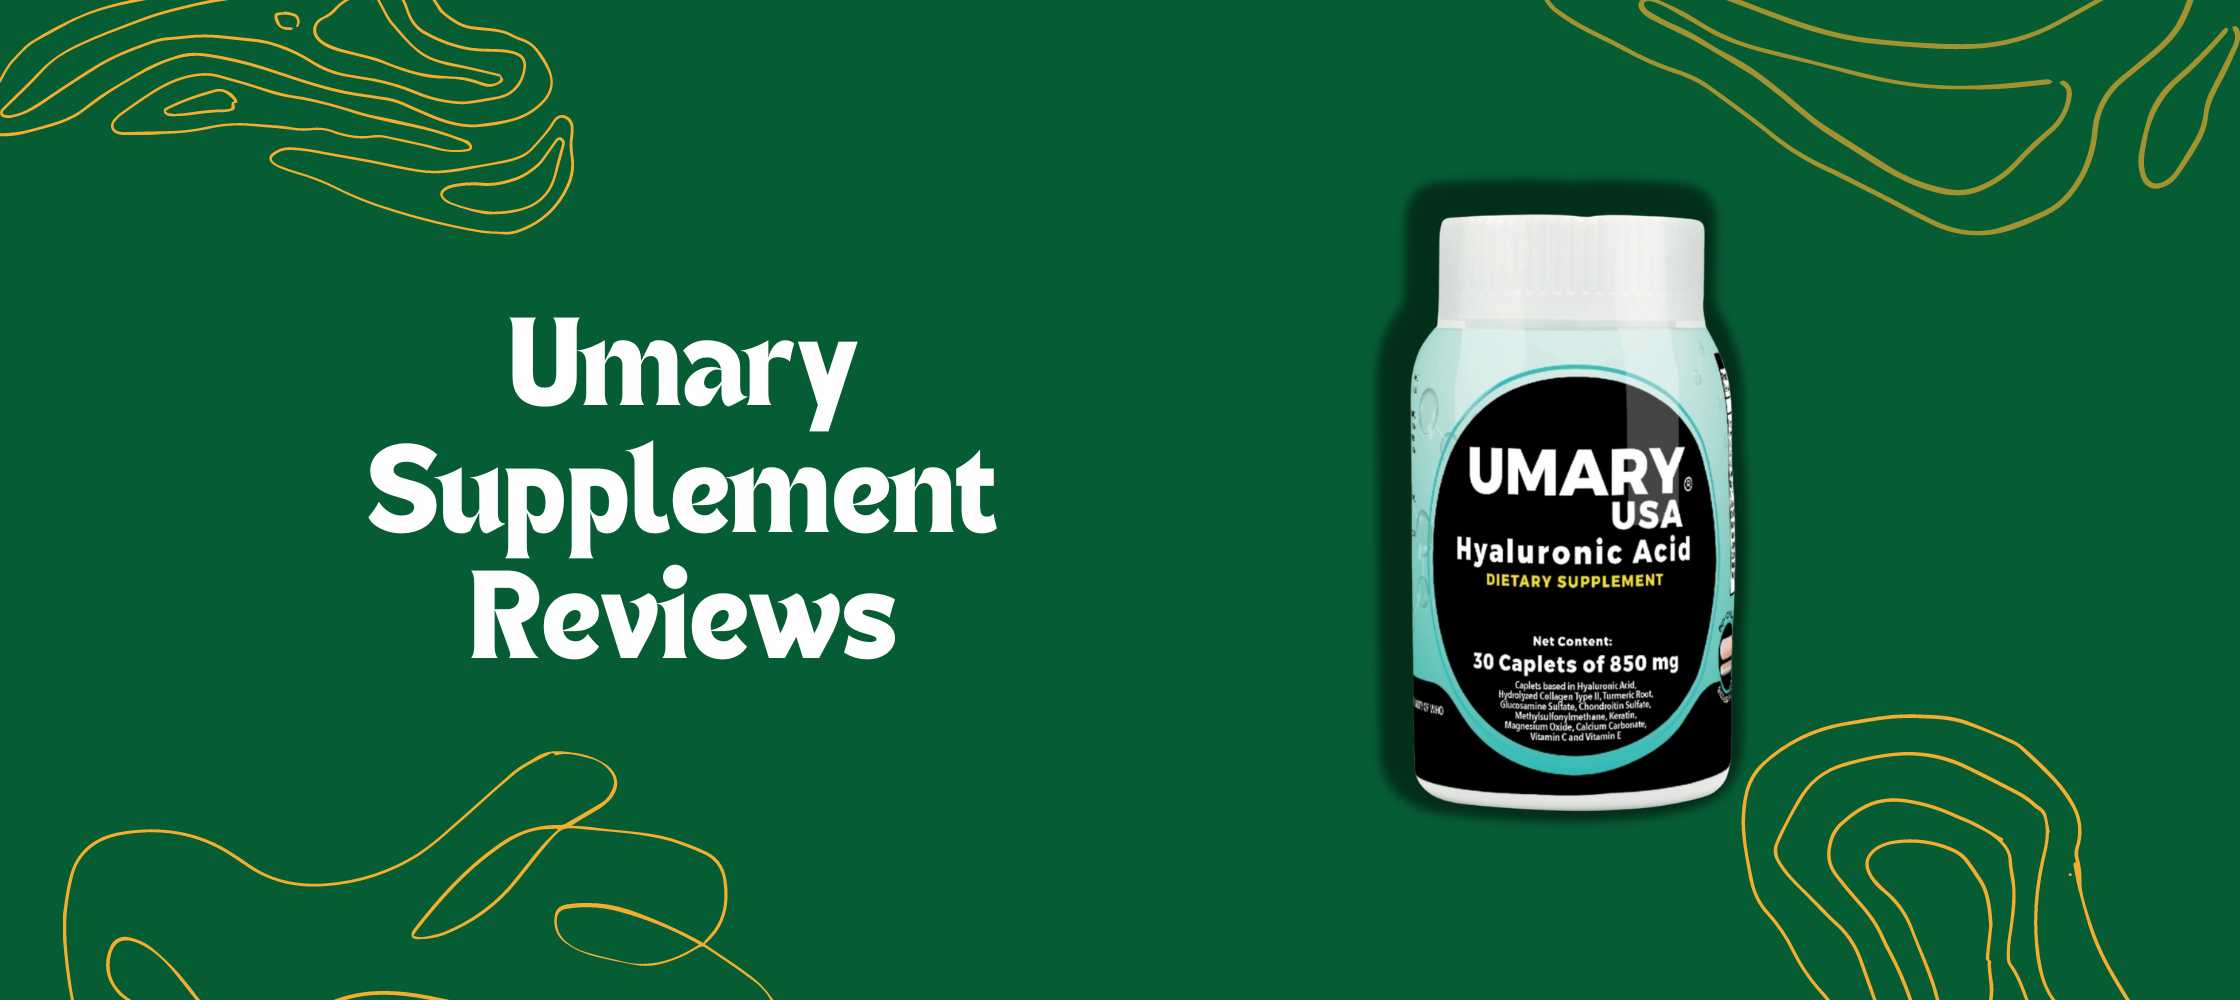 Umary Supplement Reviews